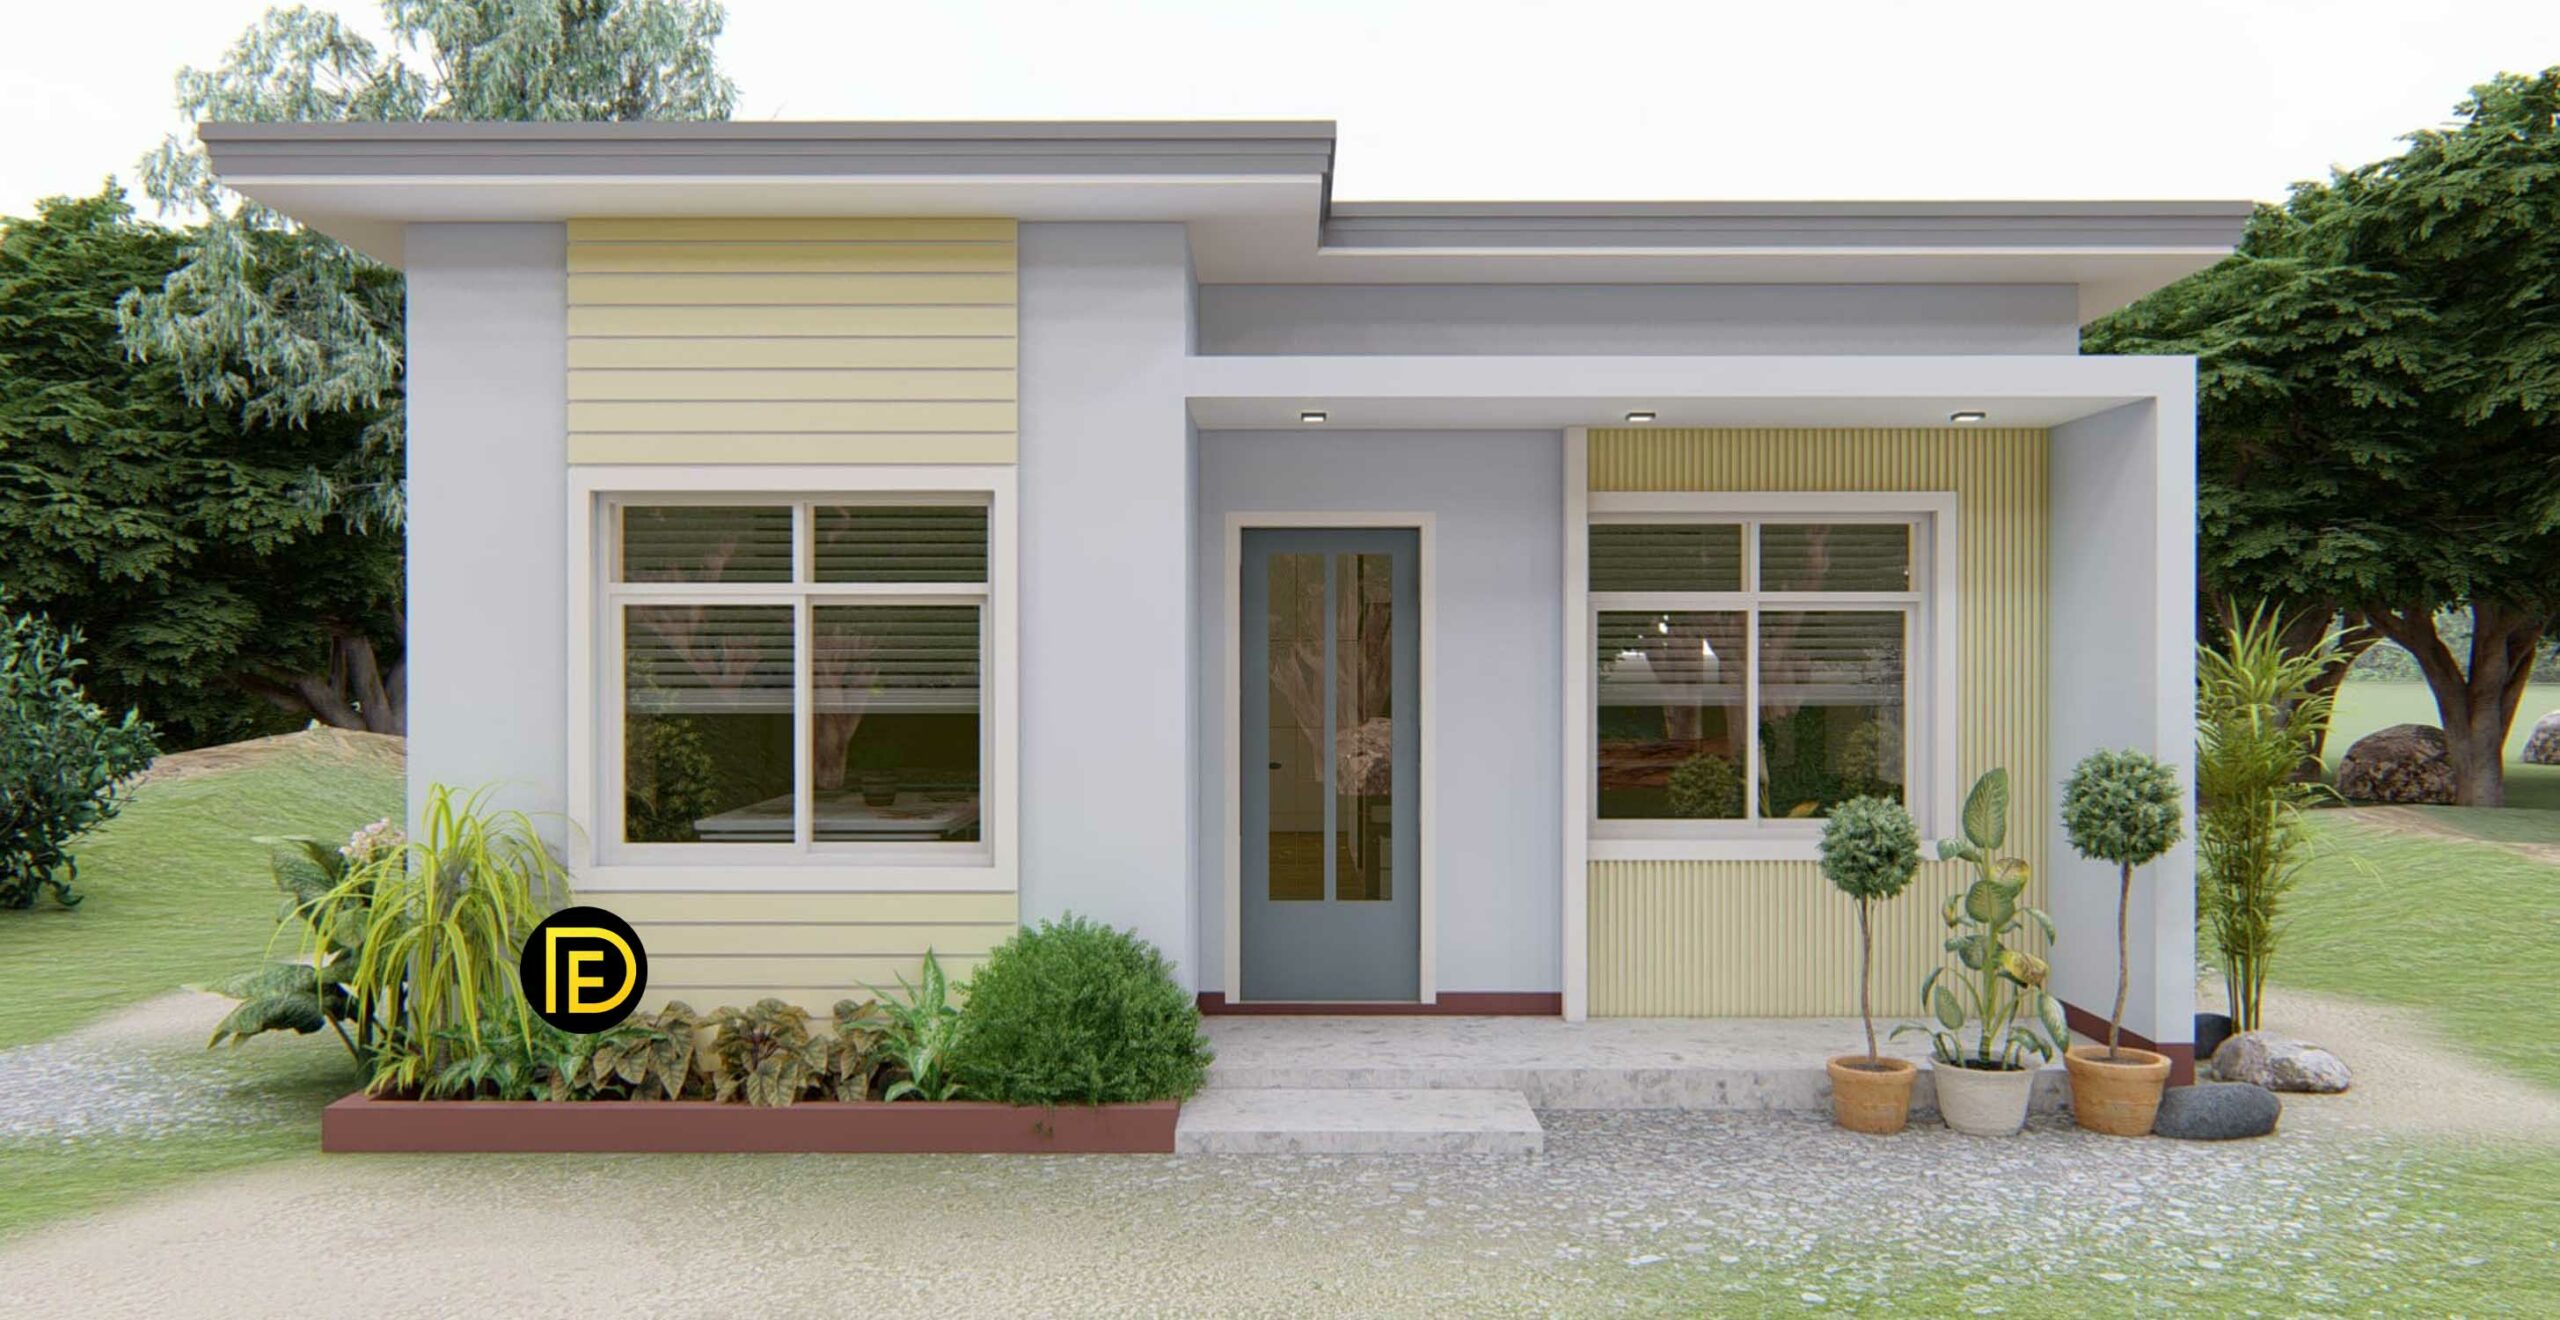 Modern Two Bedroom Bungalow House Plans 9 Images Easyhomeplan | Images ...